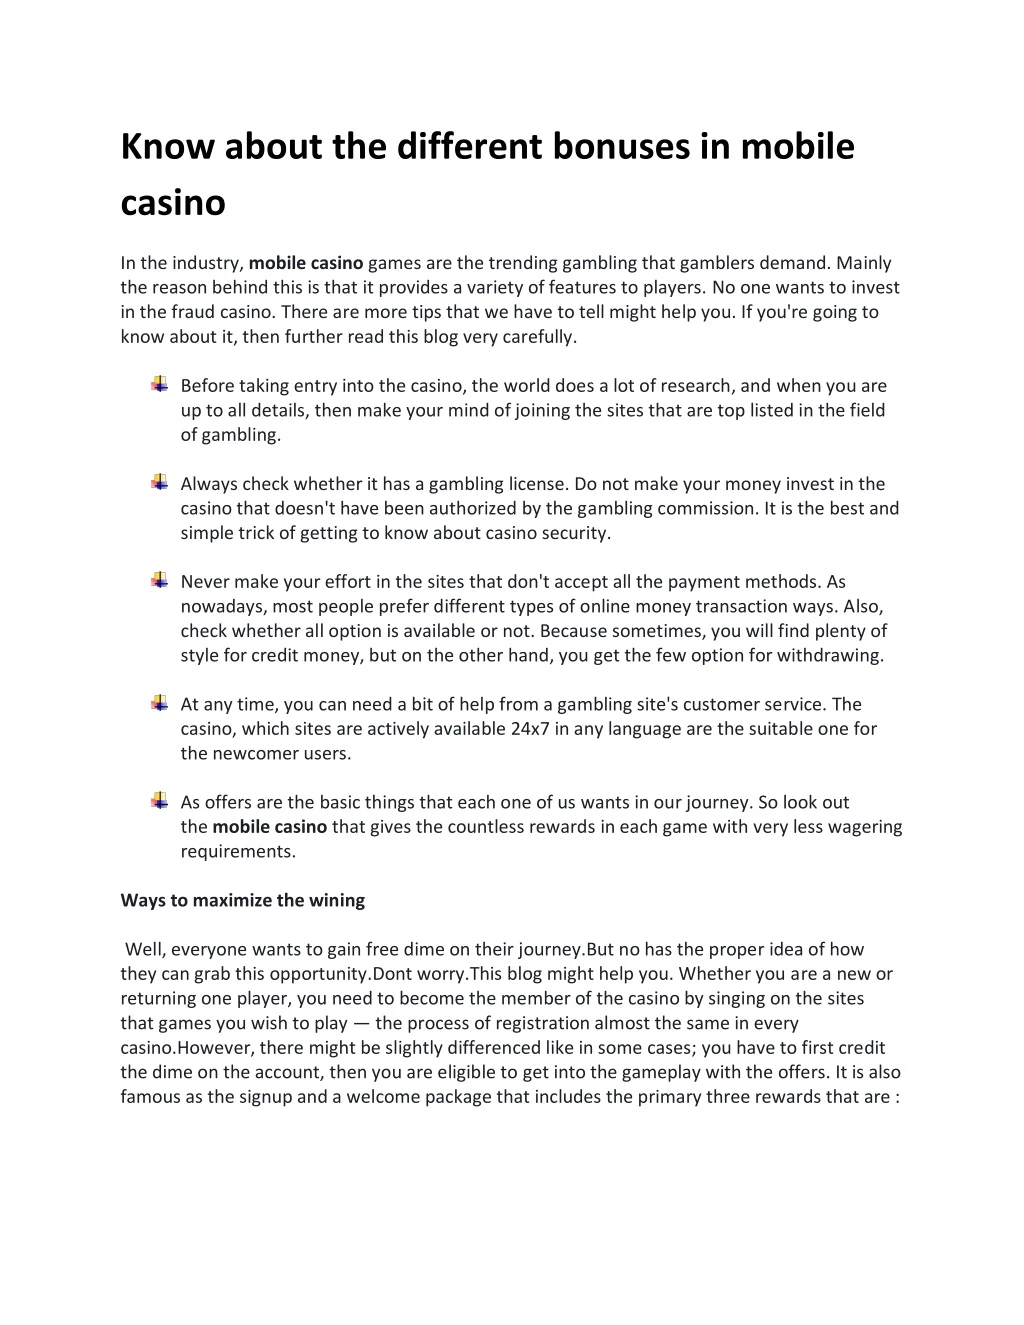 know about the different bonuses in mobile casino